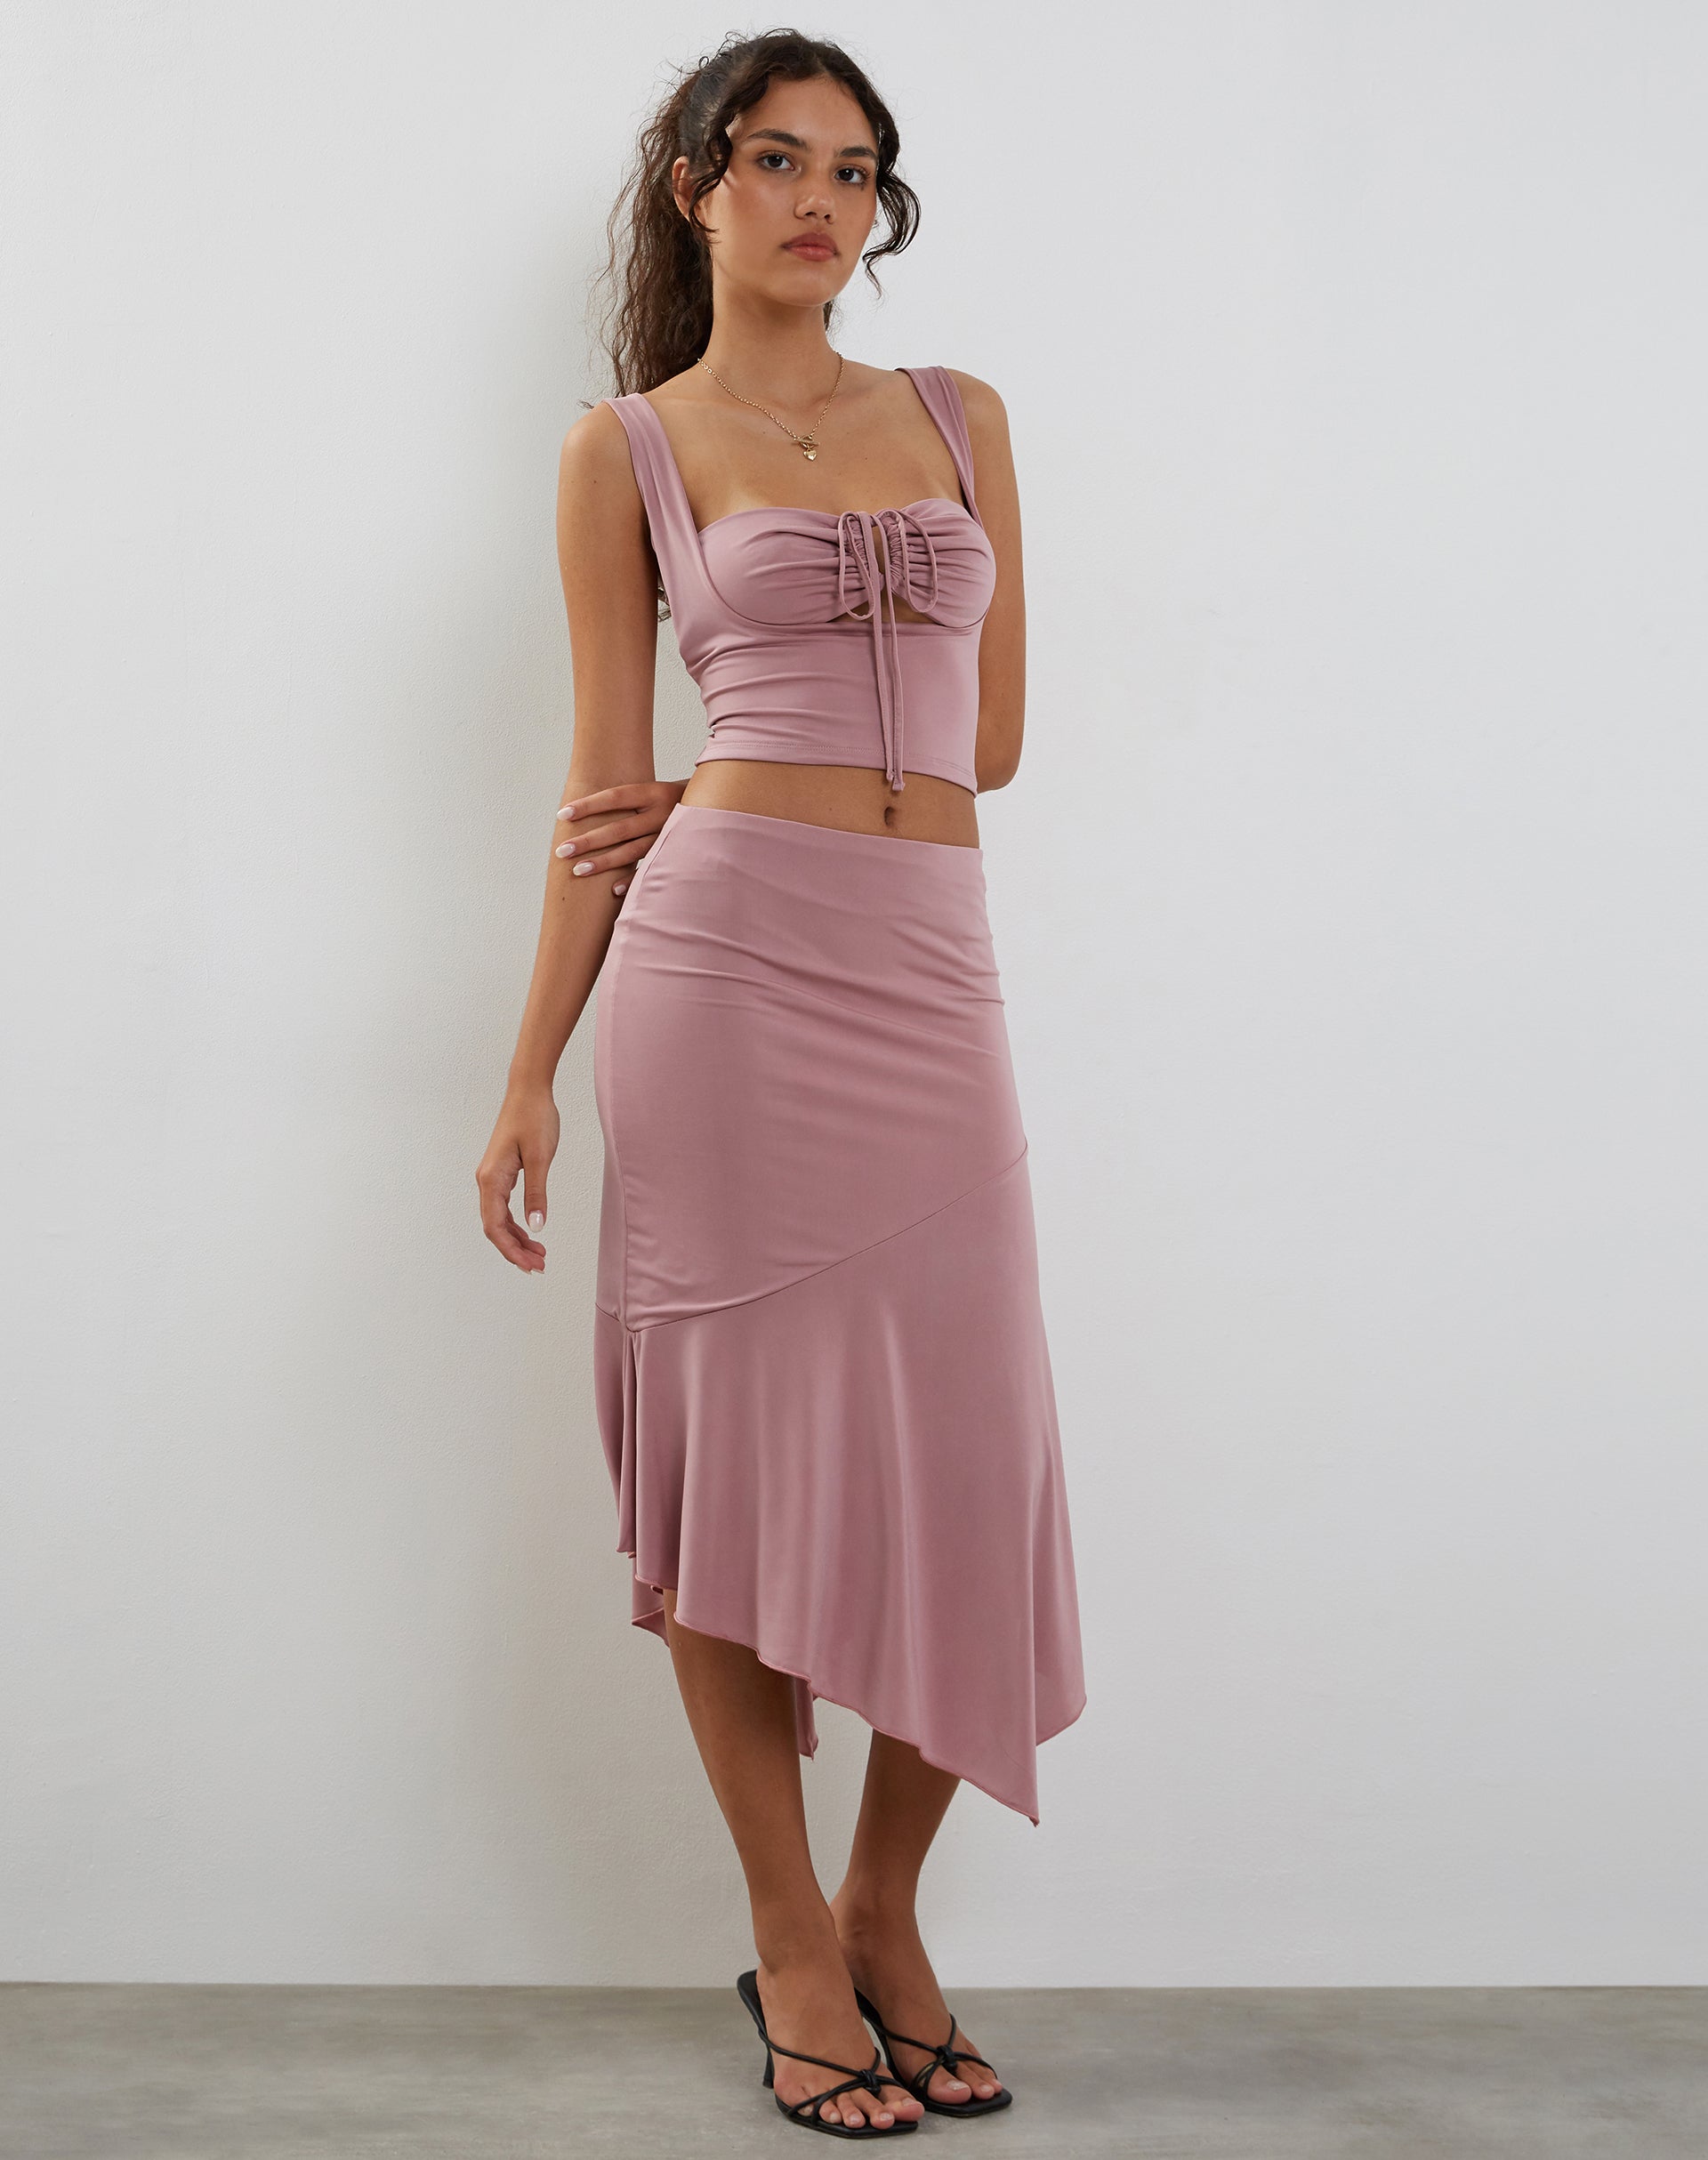 Image of Cinta Low Rise Midi Skirt in Dusty Pink